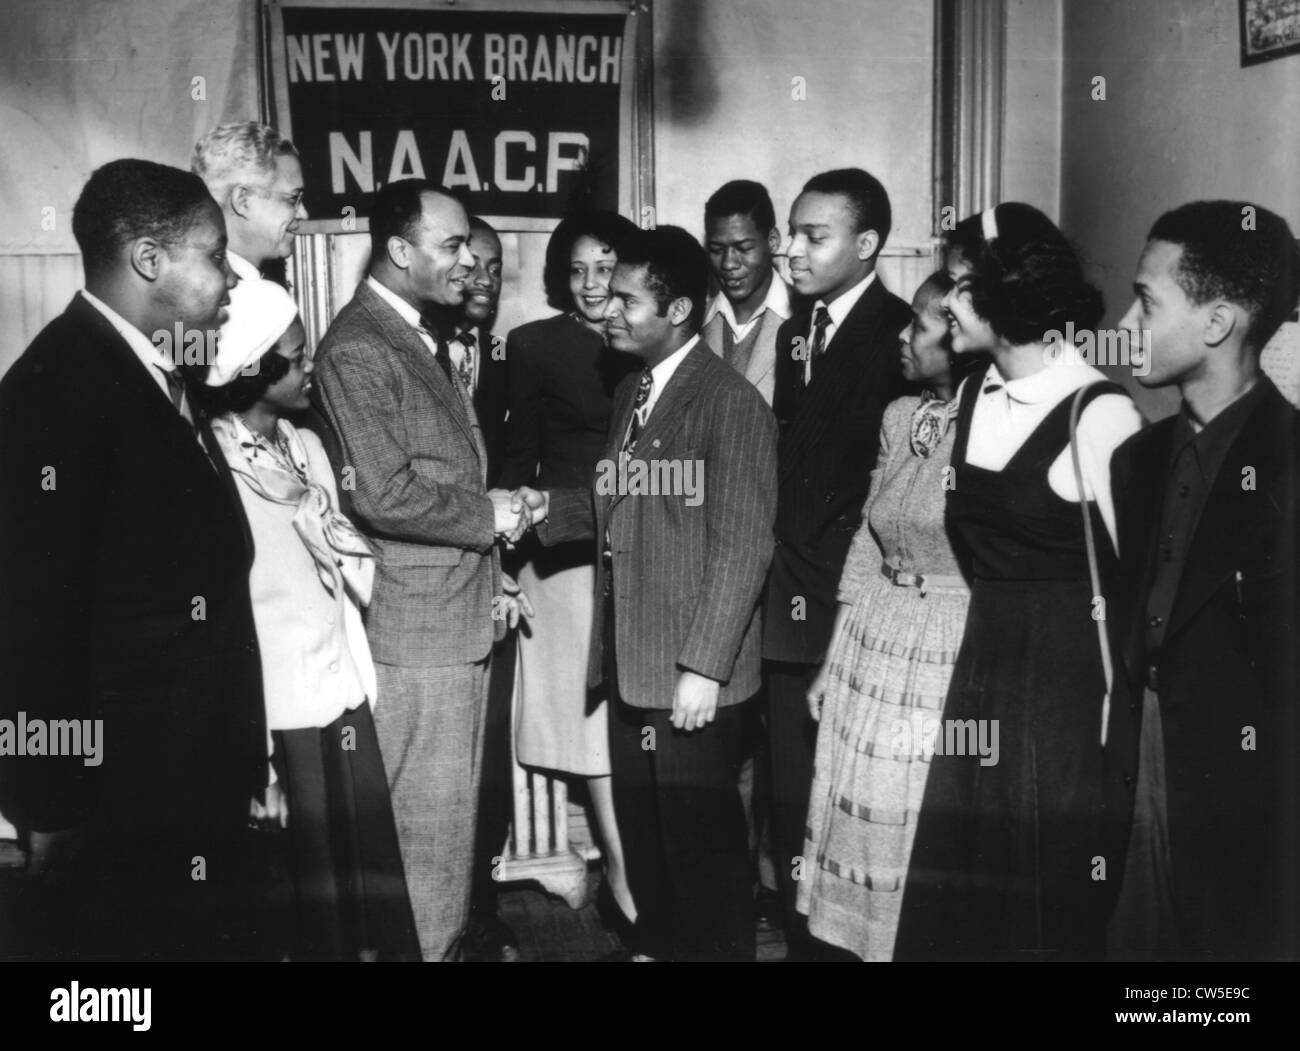 N.A.A.C.P. (National Association for the Advancement of Colored People) Banque D'Images